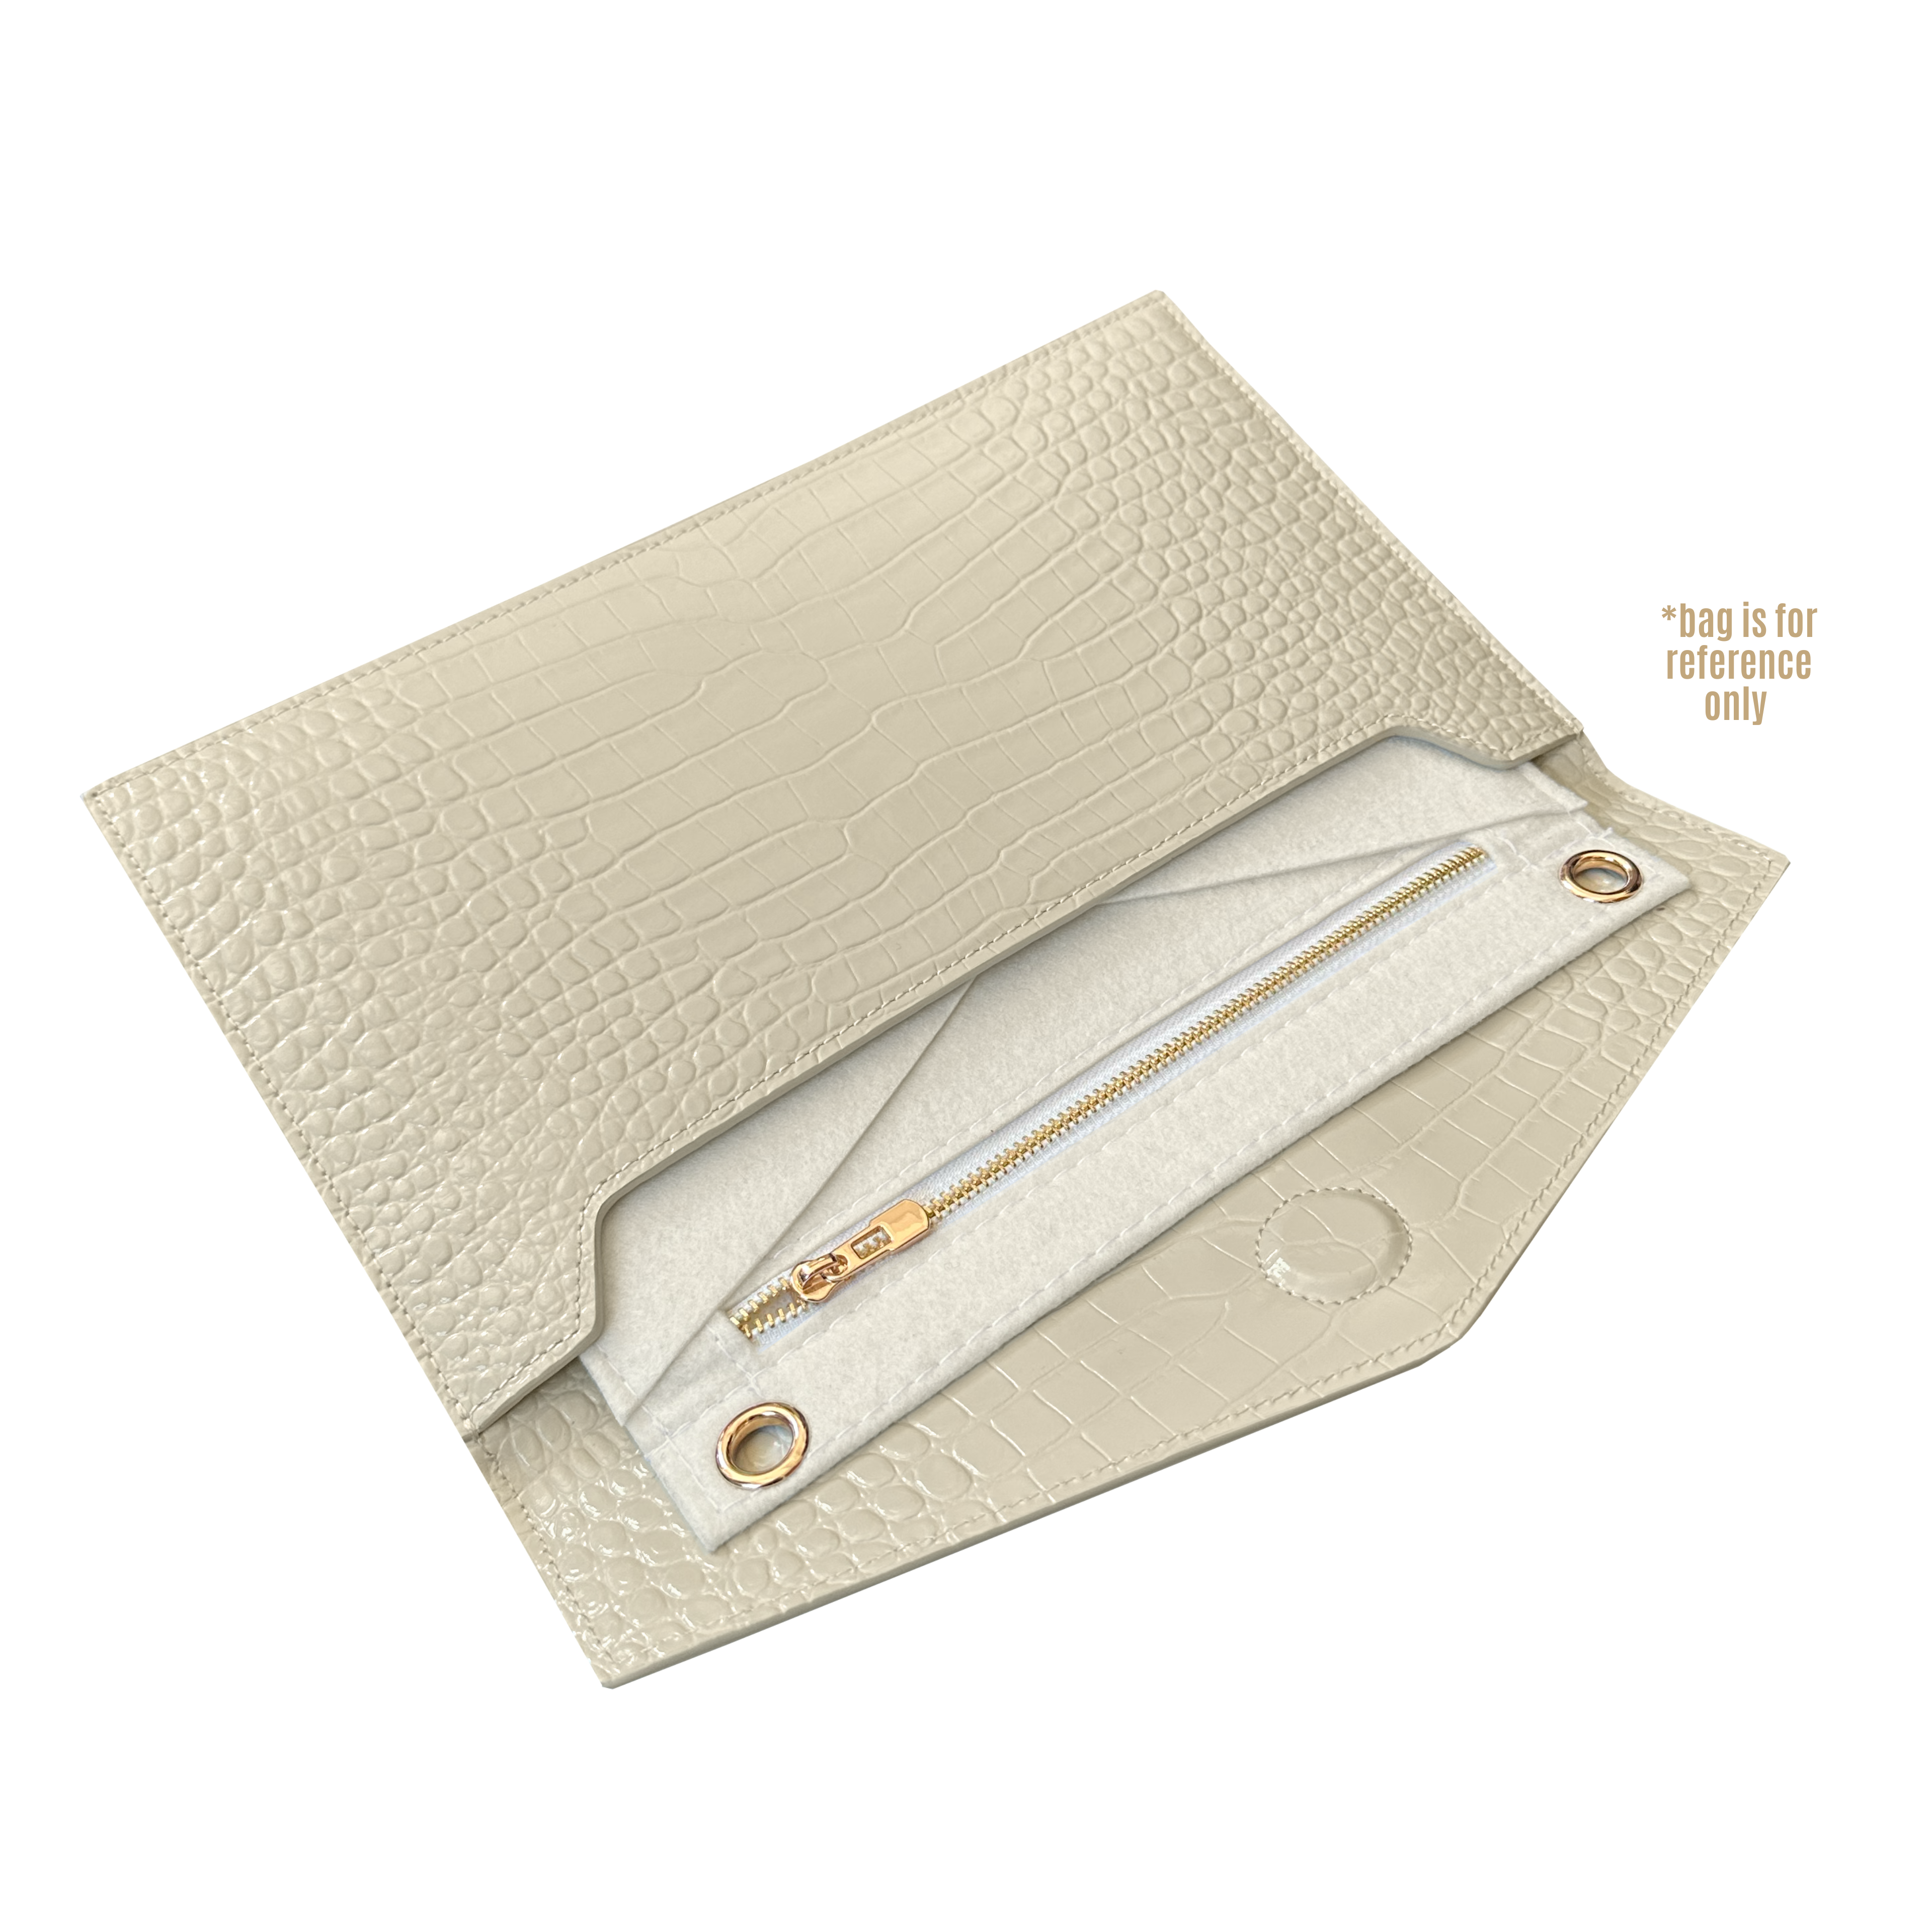 Conversion Kit for Conversion Kit for Uptown Clutch YSL | Accessory for YSL Swing | Yves Saint Laurent Strap | Designer Purse Insert | YSL Handbag Strap | Bag Insert Organizer | YSL Swing Strap | Luxury Bag Accessory | Bag Protector”